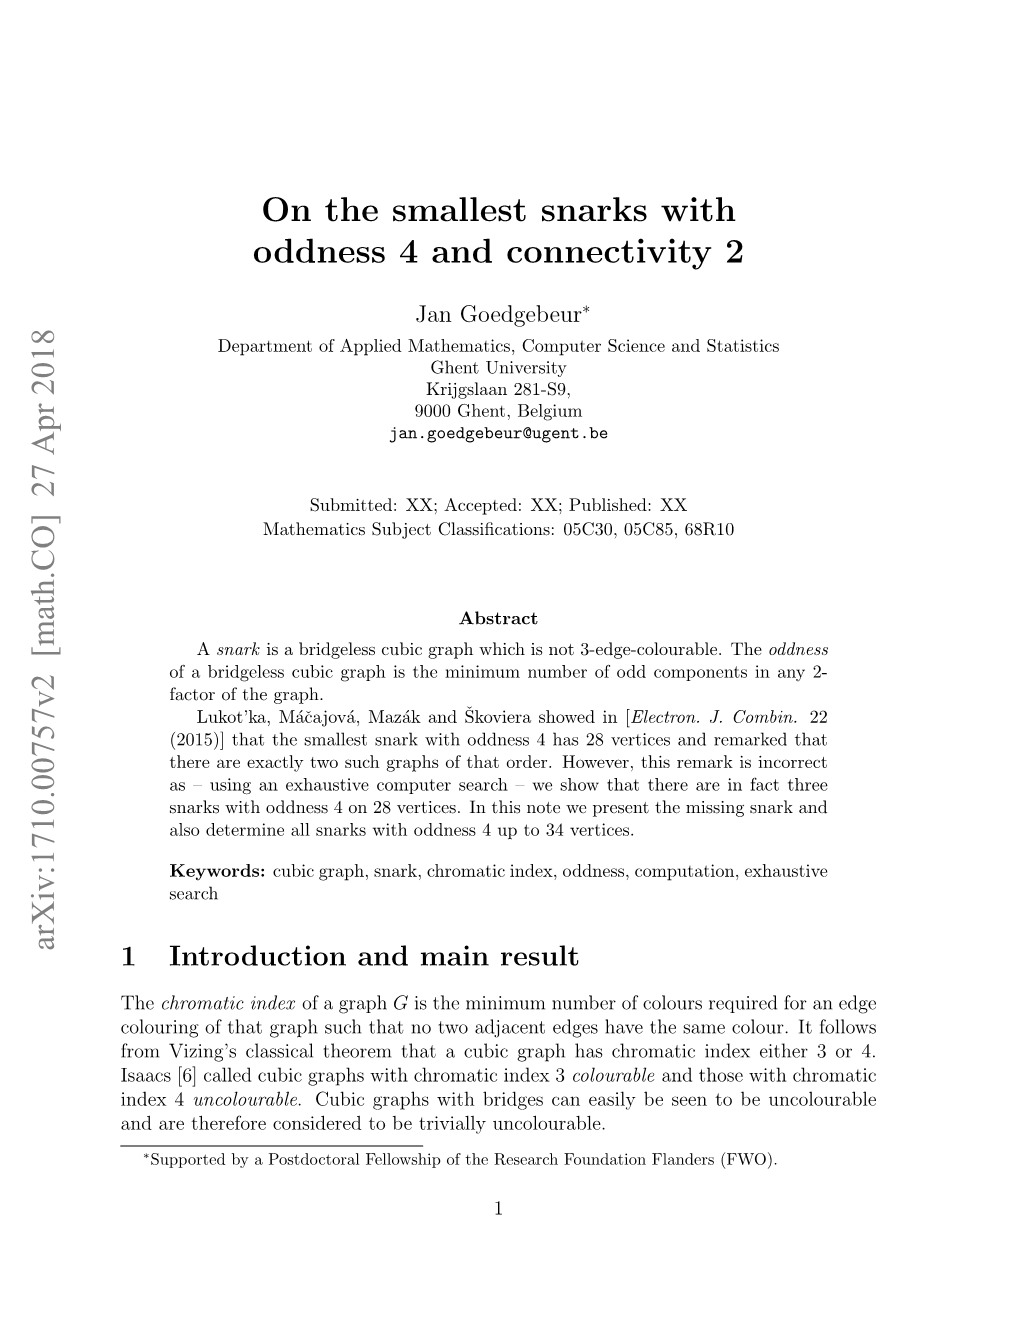 On the Smallest Snarks with Oddness 4 and Connectivity 2 Arxiv:1710.00757V2 [Math.CO] 27 Apr 2018